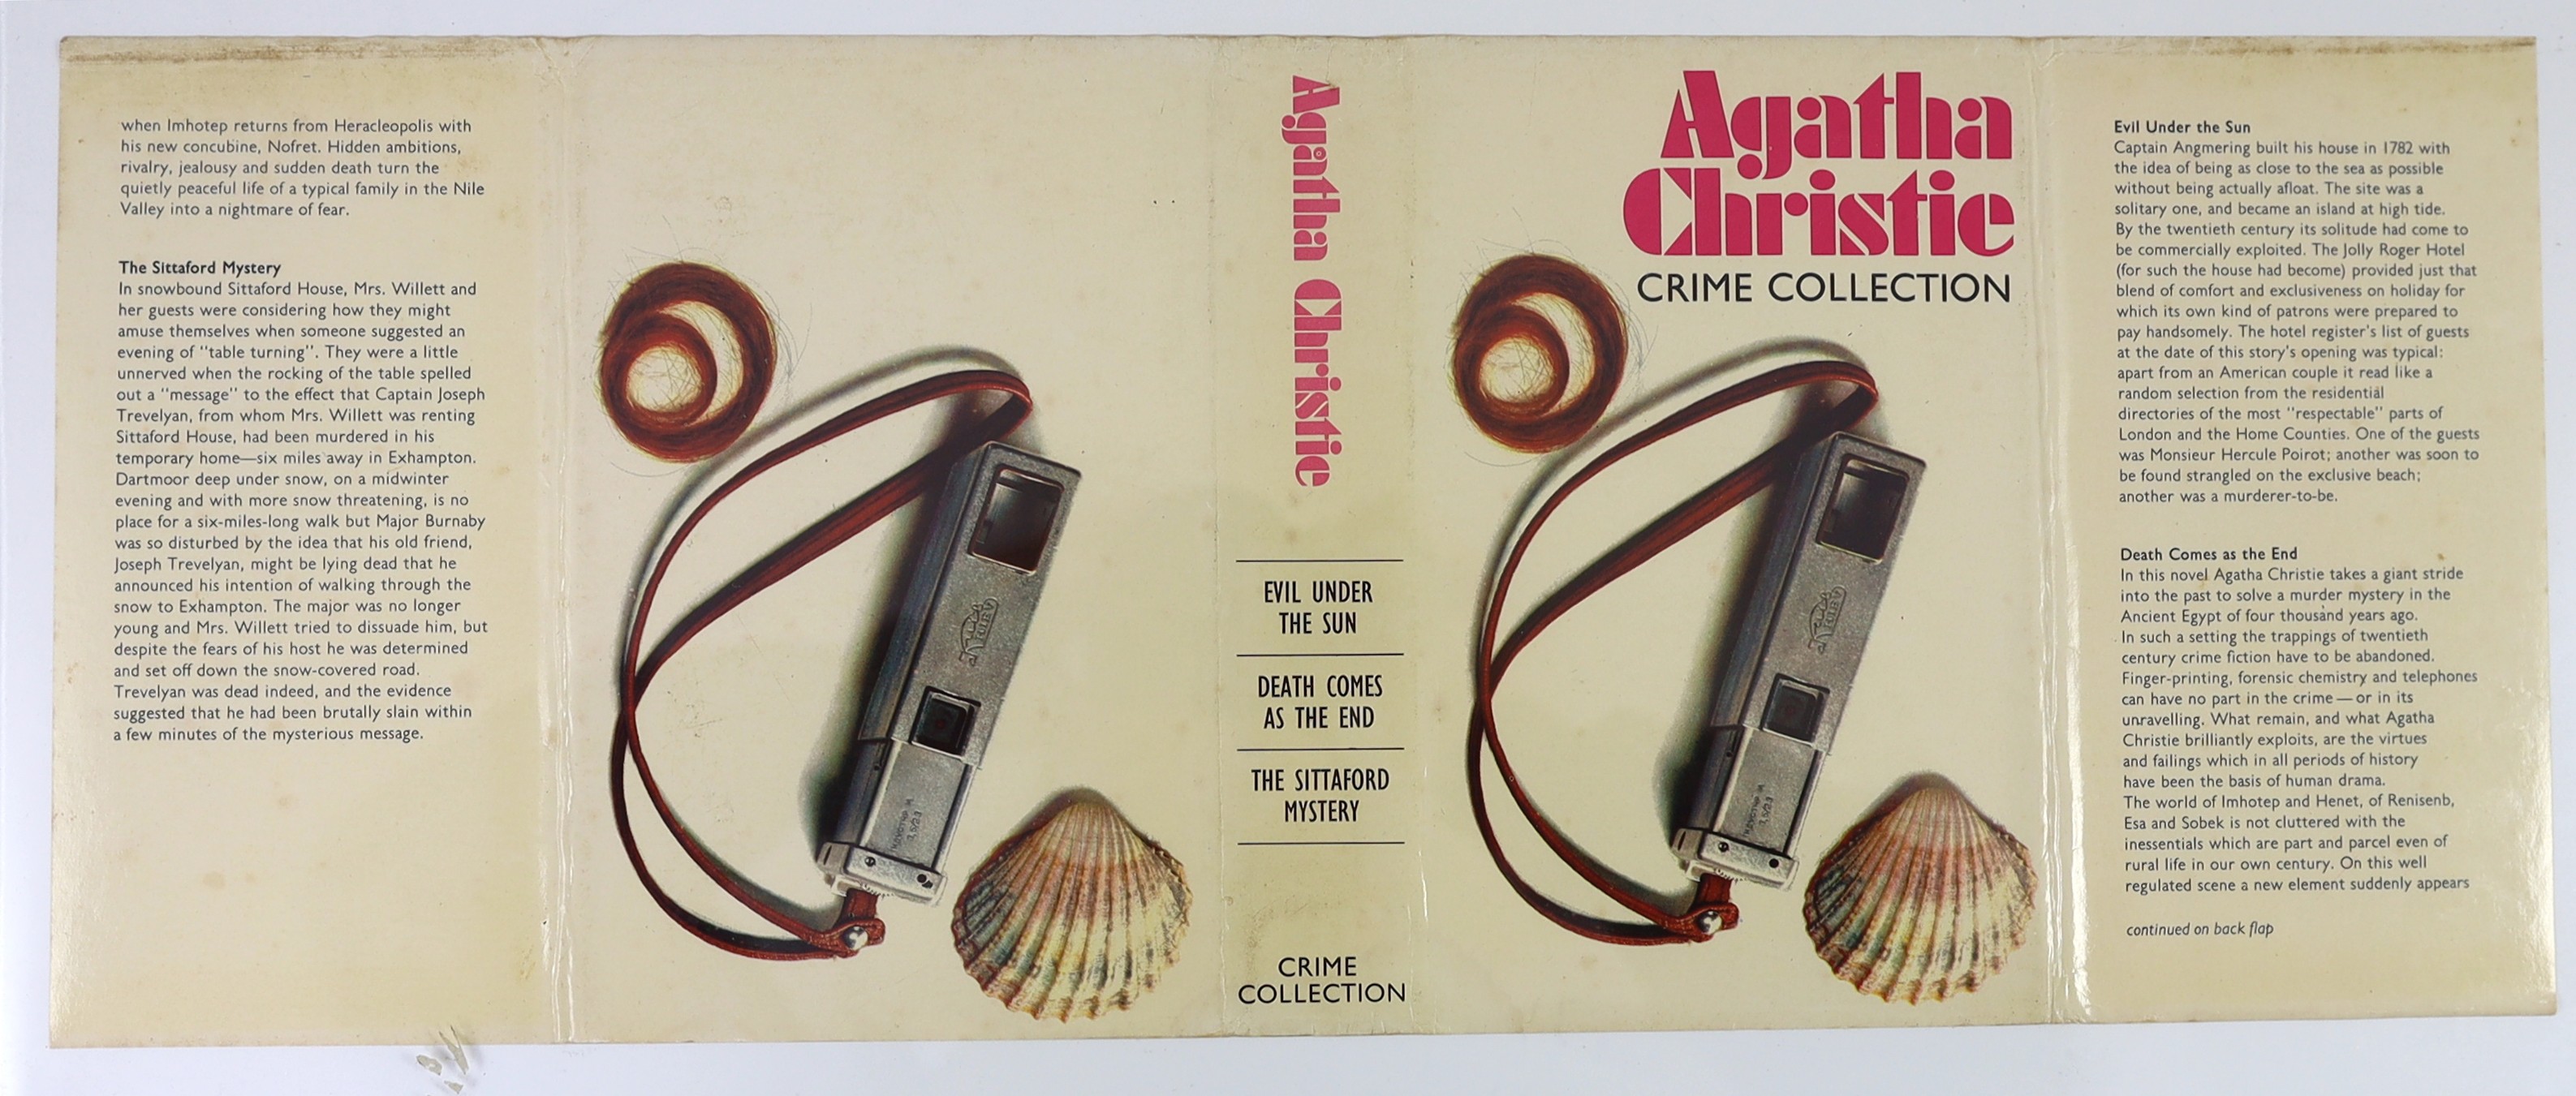 Christie, Agatha - Crime Collection: Evil Under The Sun / Death Comes As The End / The Sittaford Mystery, 1970